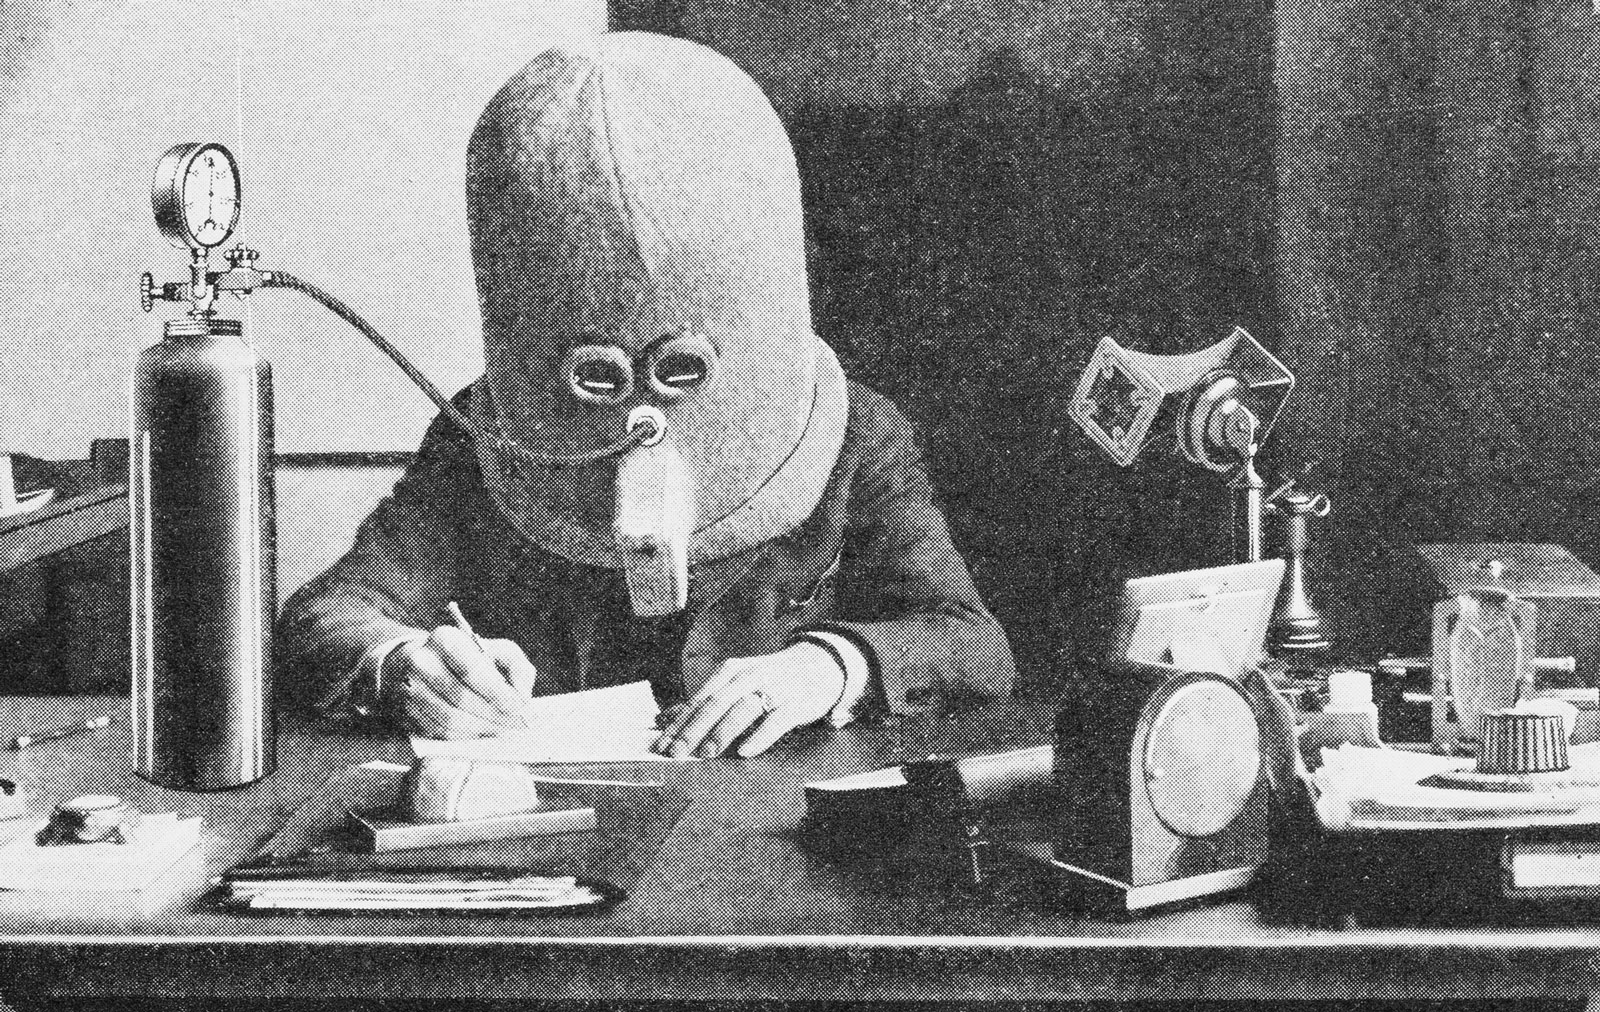 Hugo Gernsback wearing his Isolator, which eliminates external noises for concentration, from Science and Invention, July, 1925